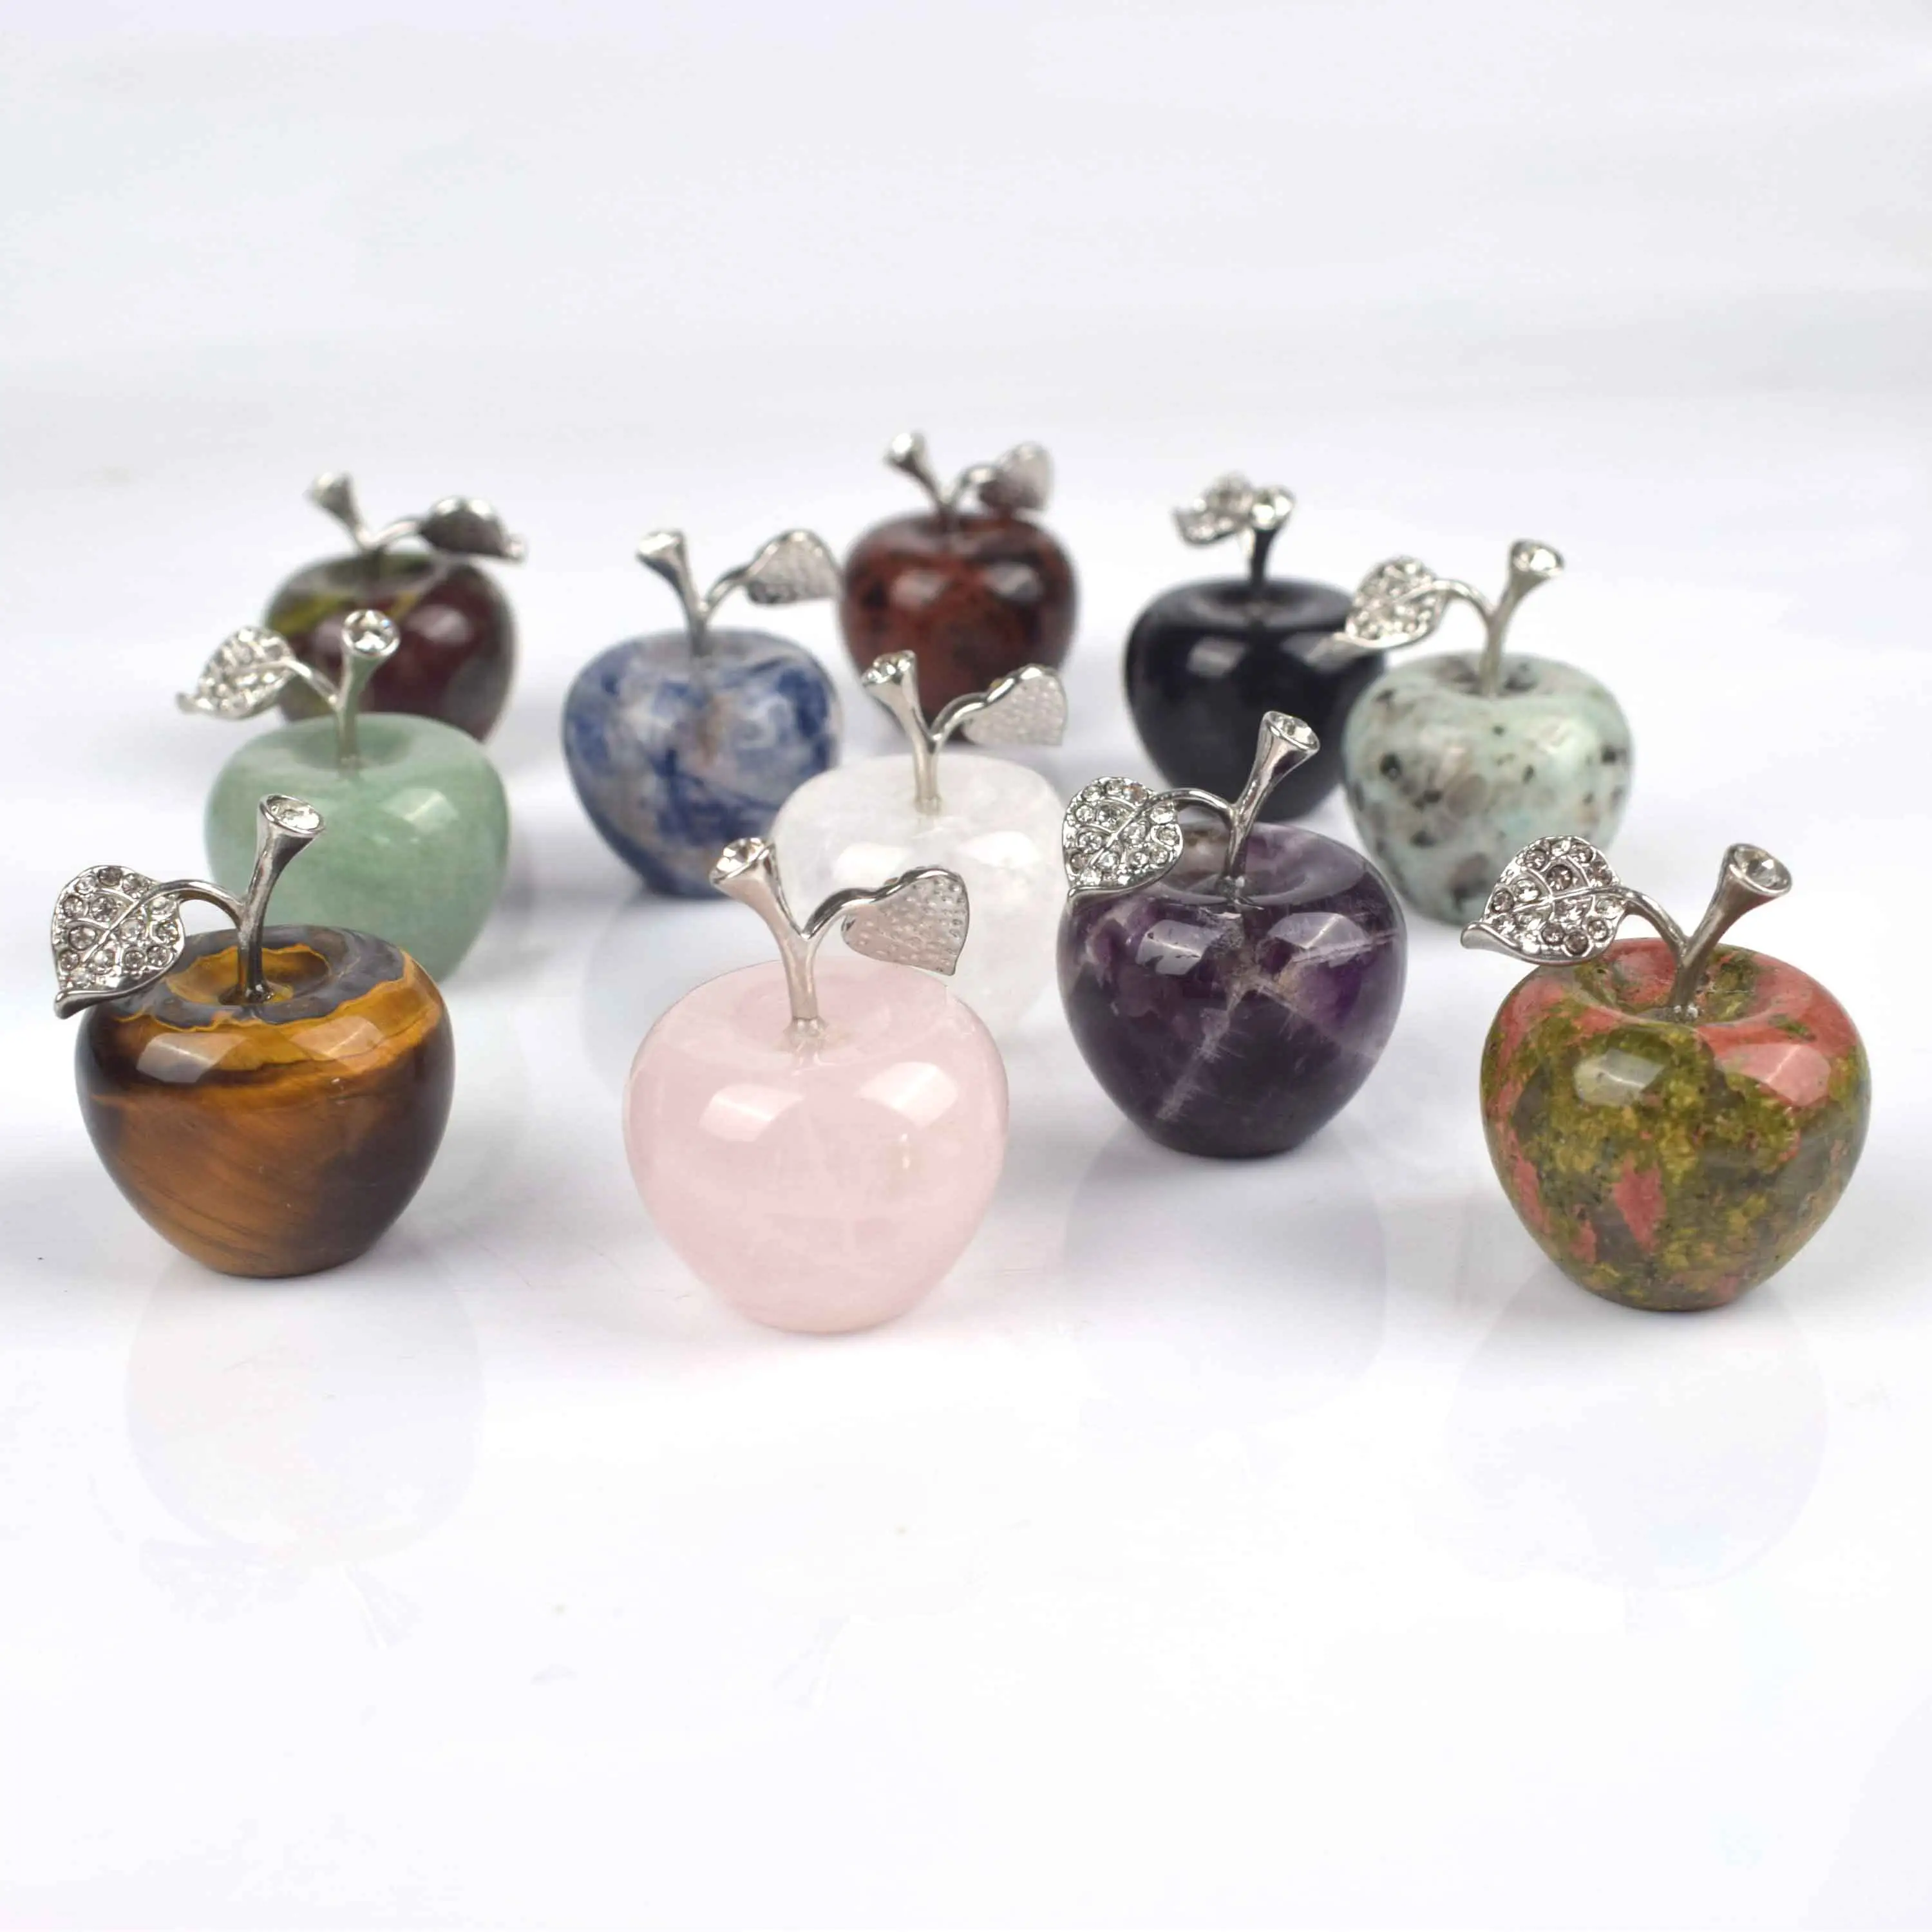 High Quality Natural Crystal Polished Apple Carving For Halloween Decoration